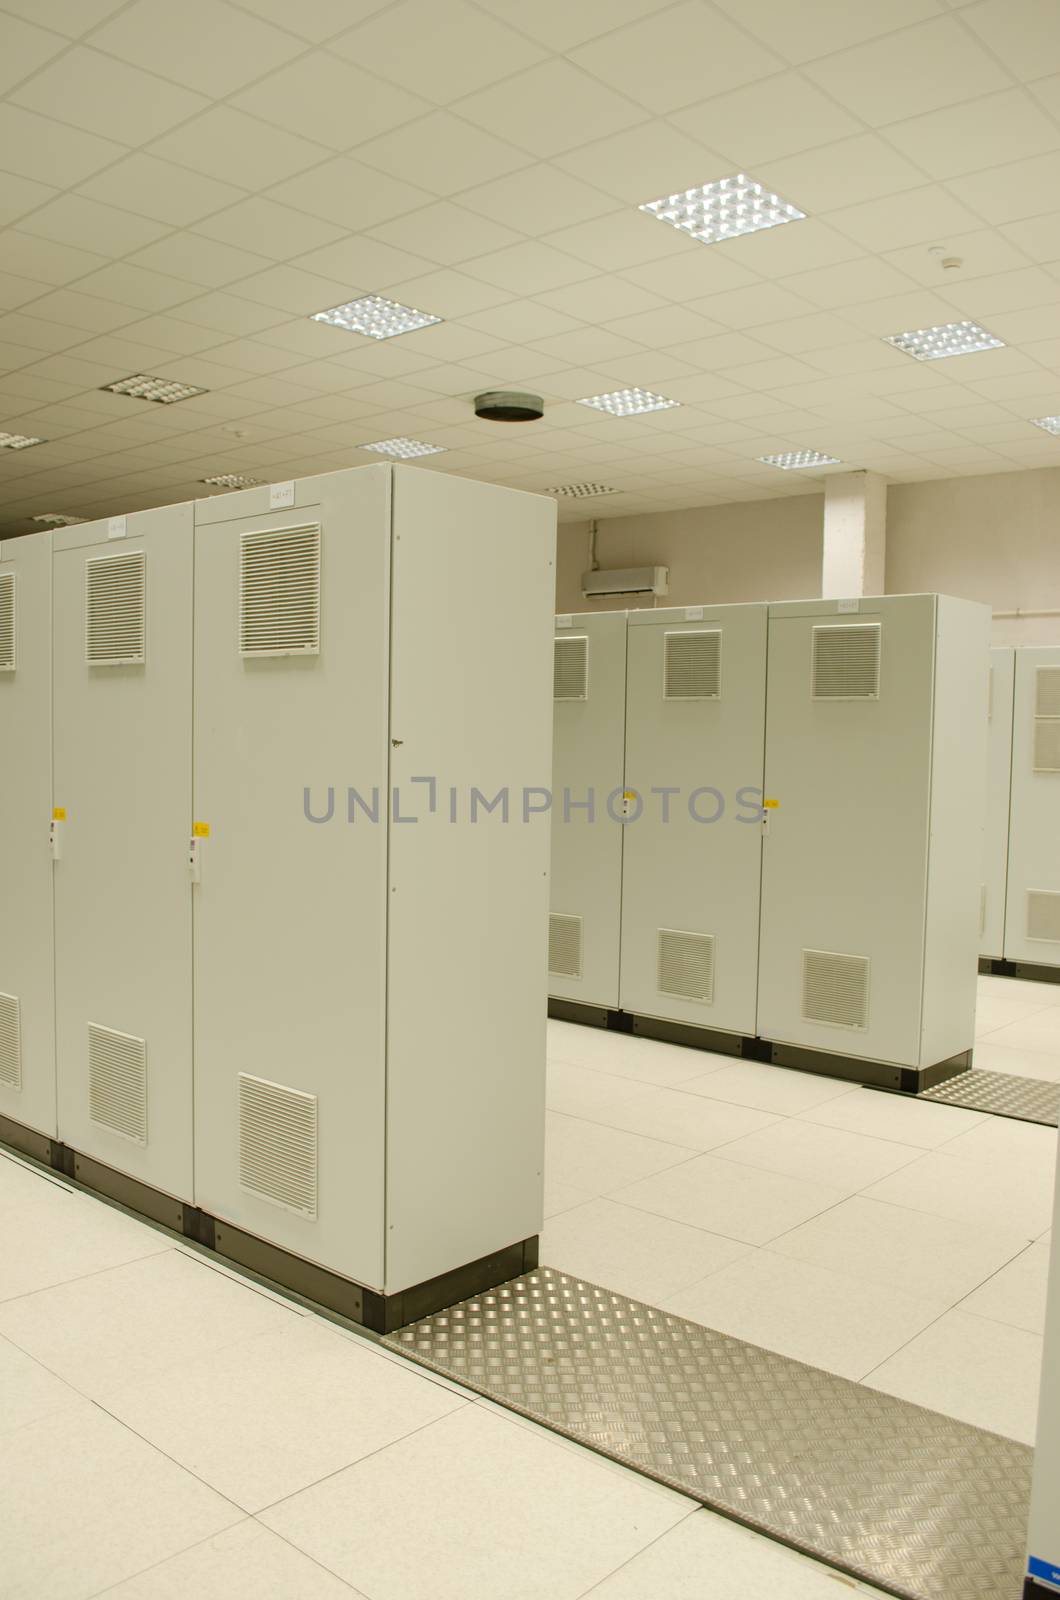 Powerful servers computers placed in special cabinets stored in scientific research center.